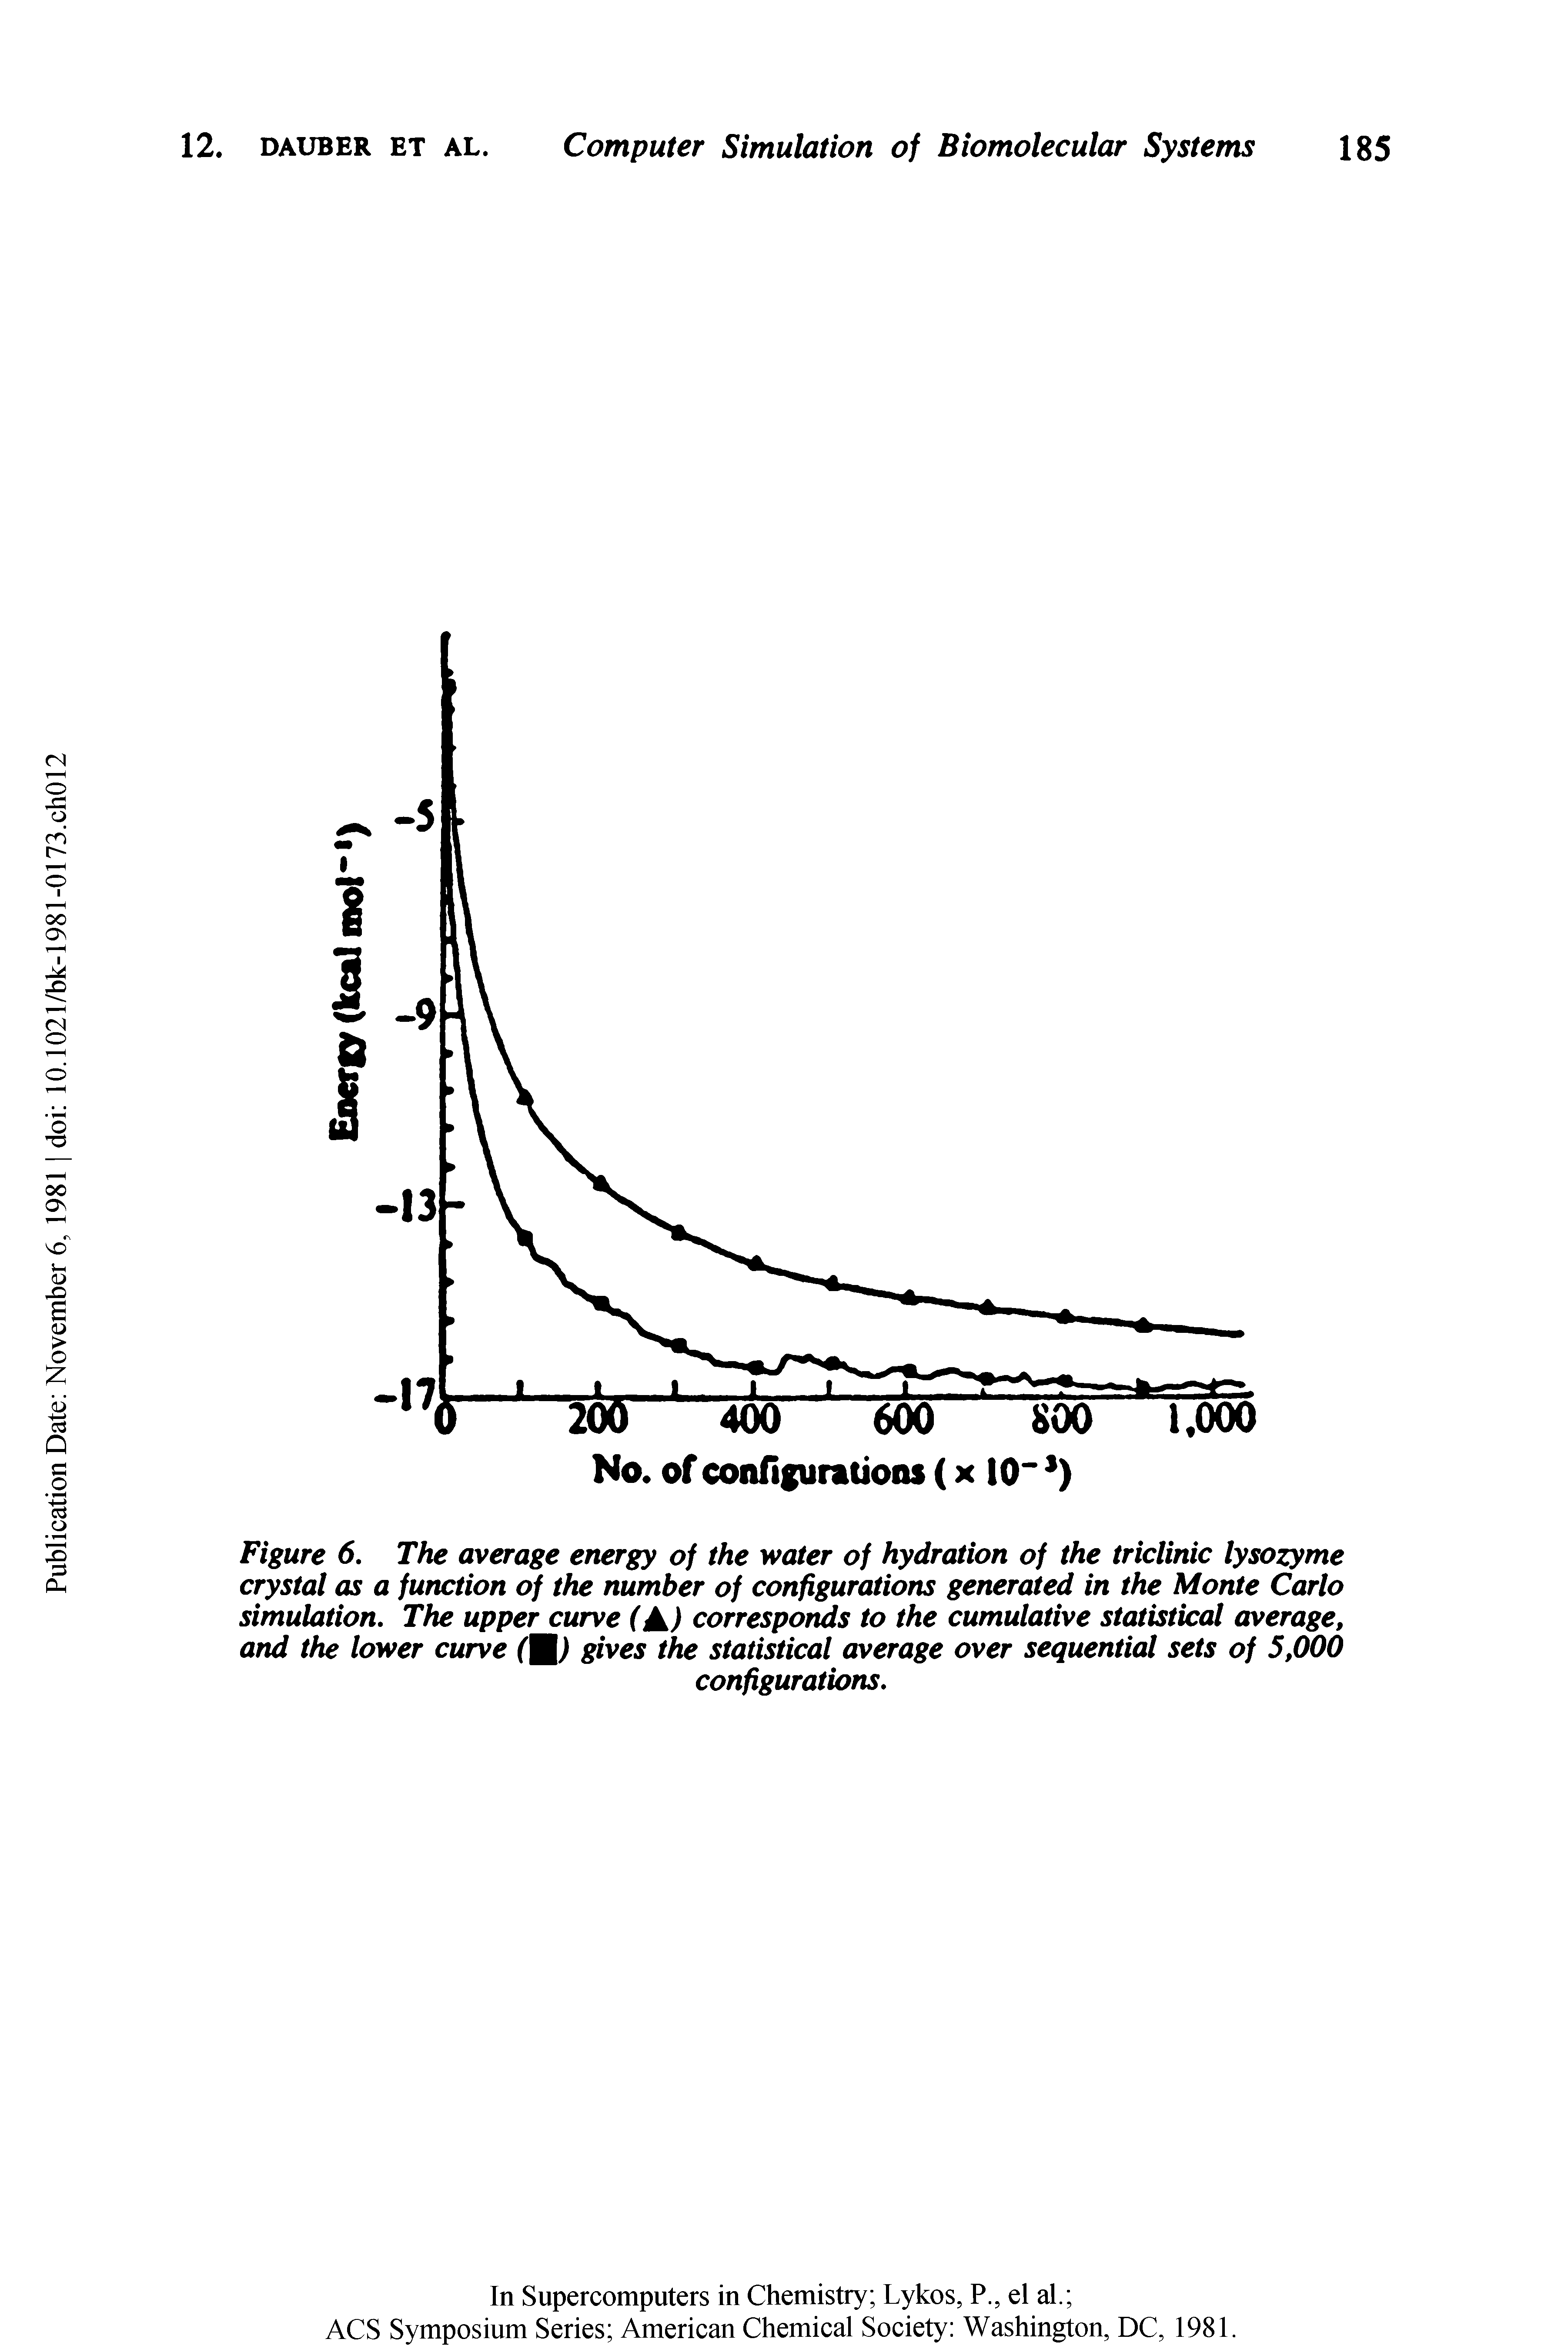 Figure 6. The average energy of the water of hydration of the triclinic lysozyme crystal as a function of the number of configurations generated in the Monte Carlo simulation. The upper curve (A) corresponds to the cumulative statistical average, and the lower curve fU gives the statistical average over sequential sets of 5,000...